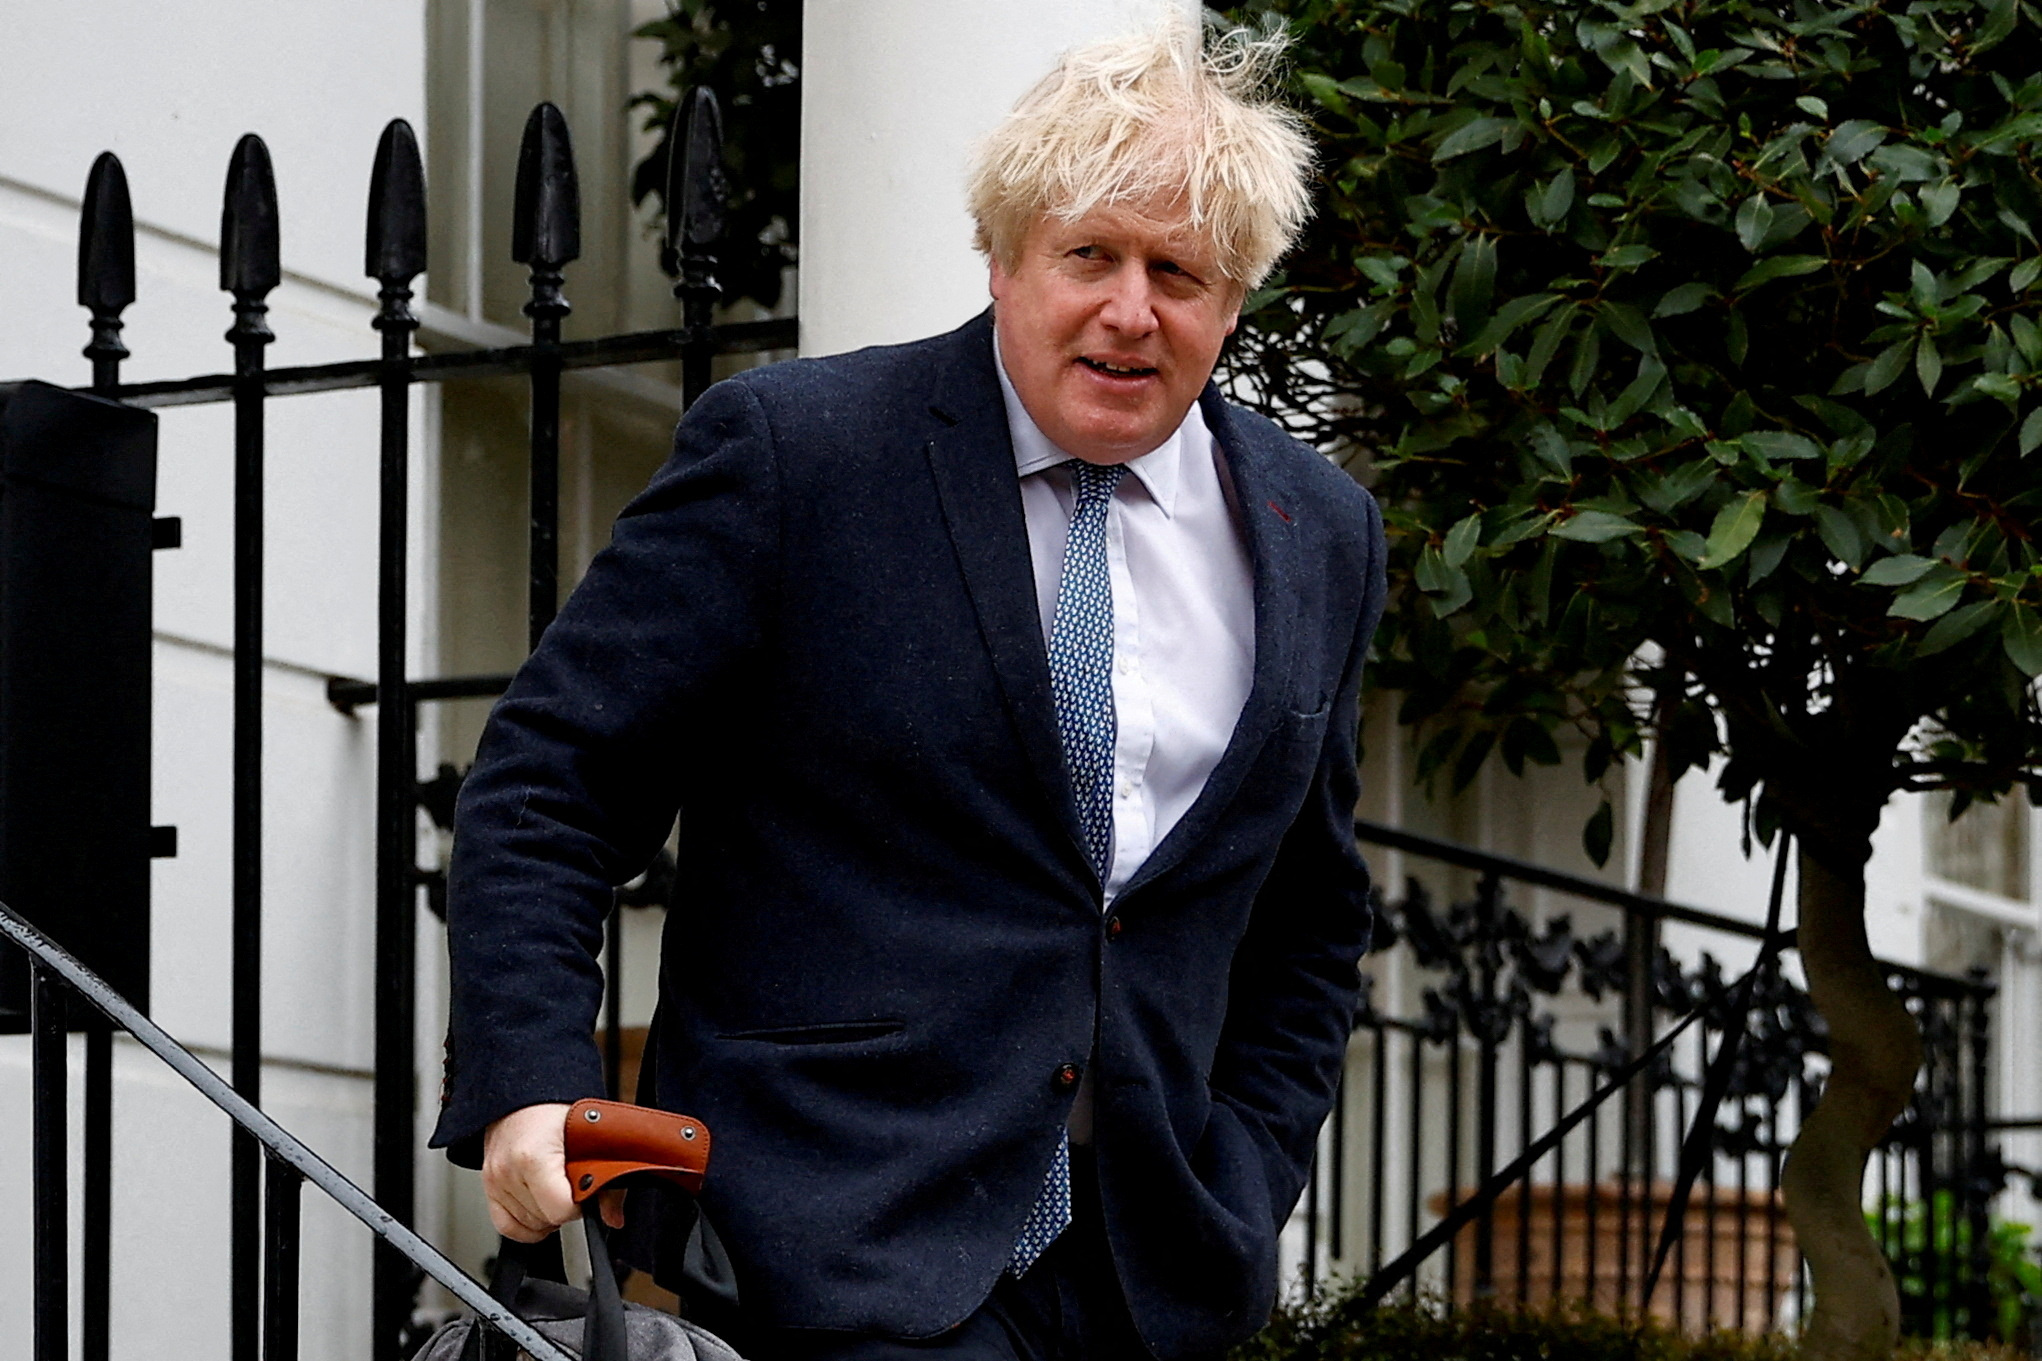 Boris Johnson claimed he had been stitched up by political rivals. Peter Nicholls/ Reuters